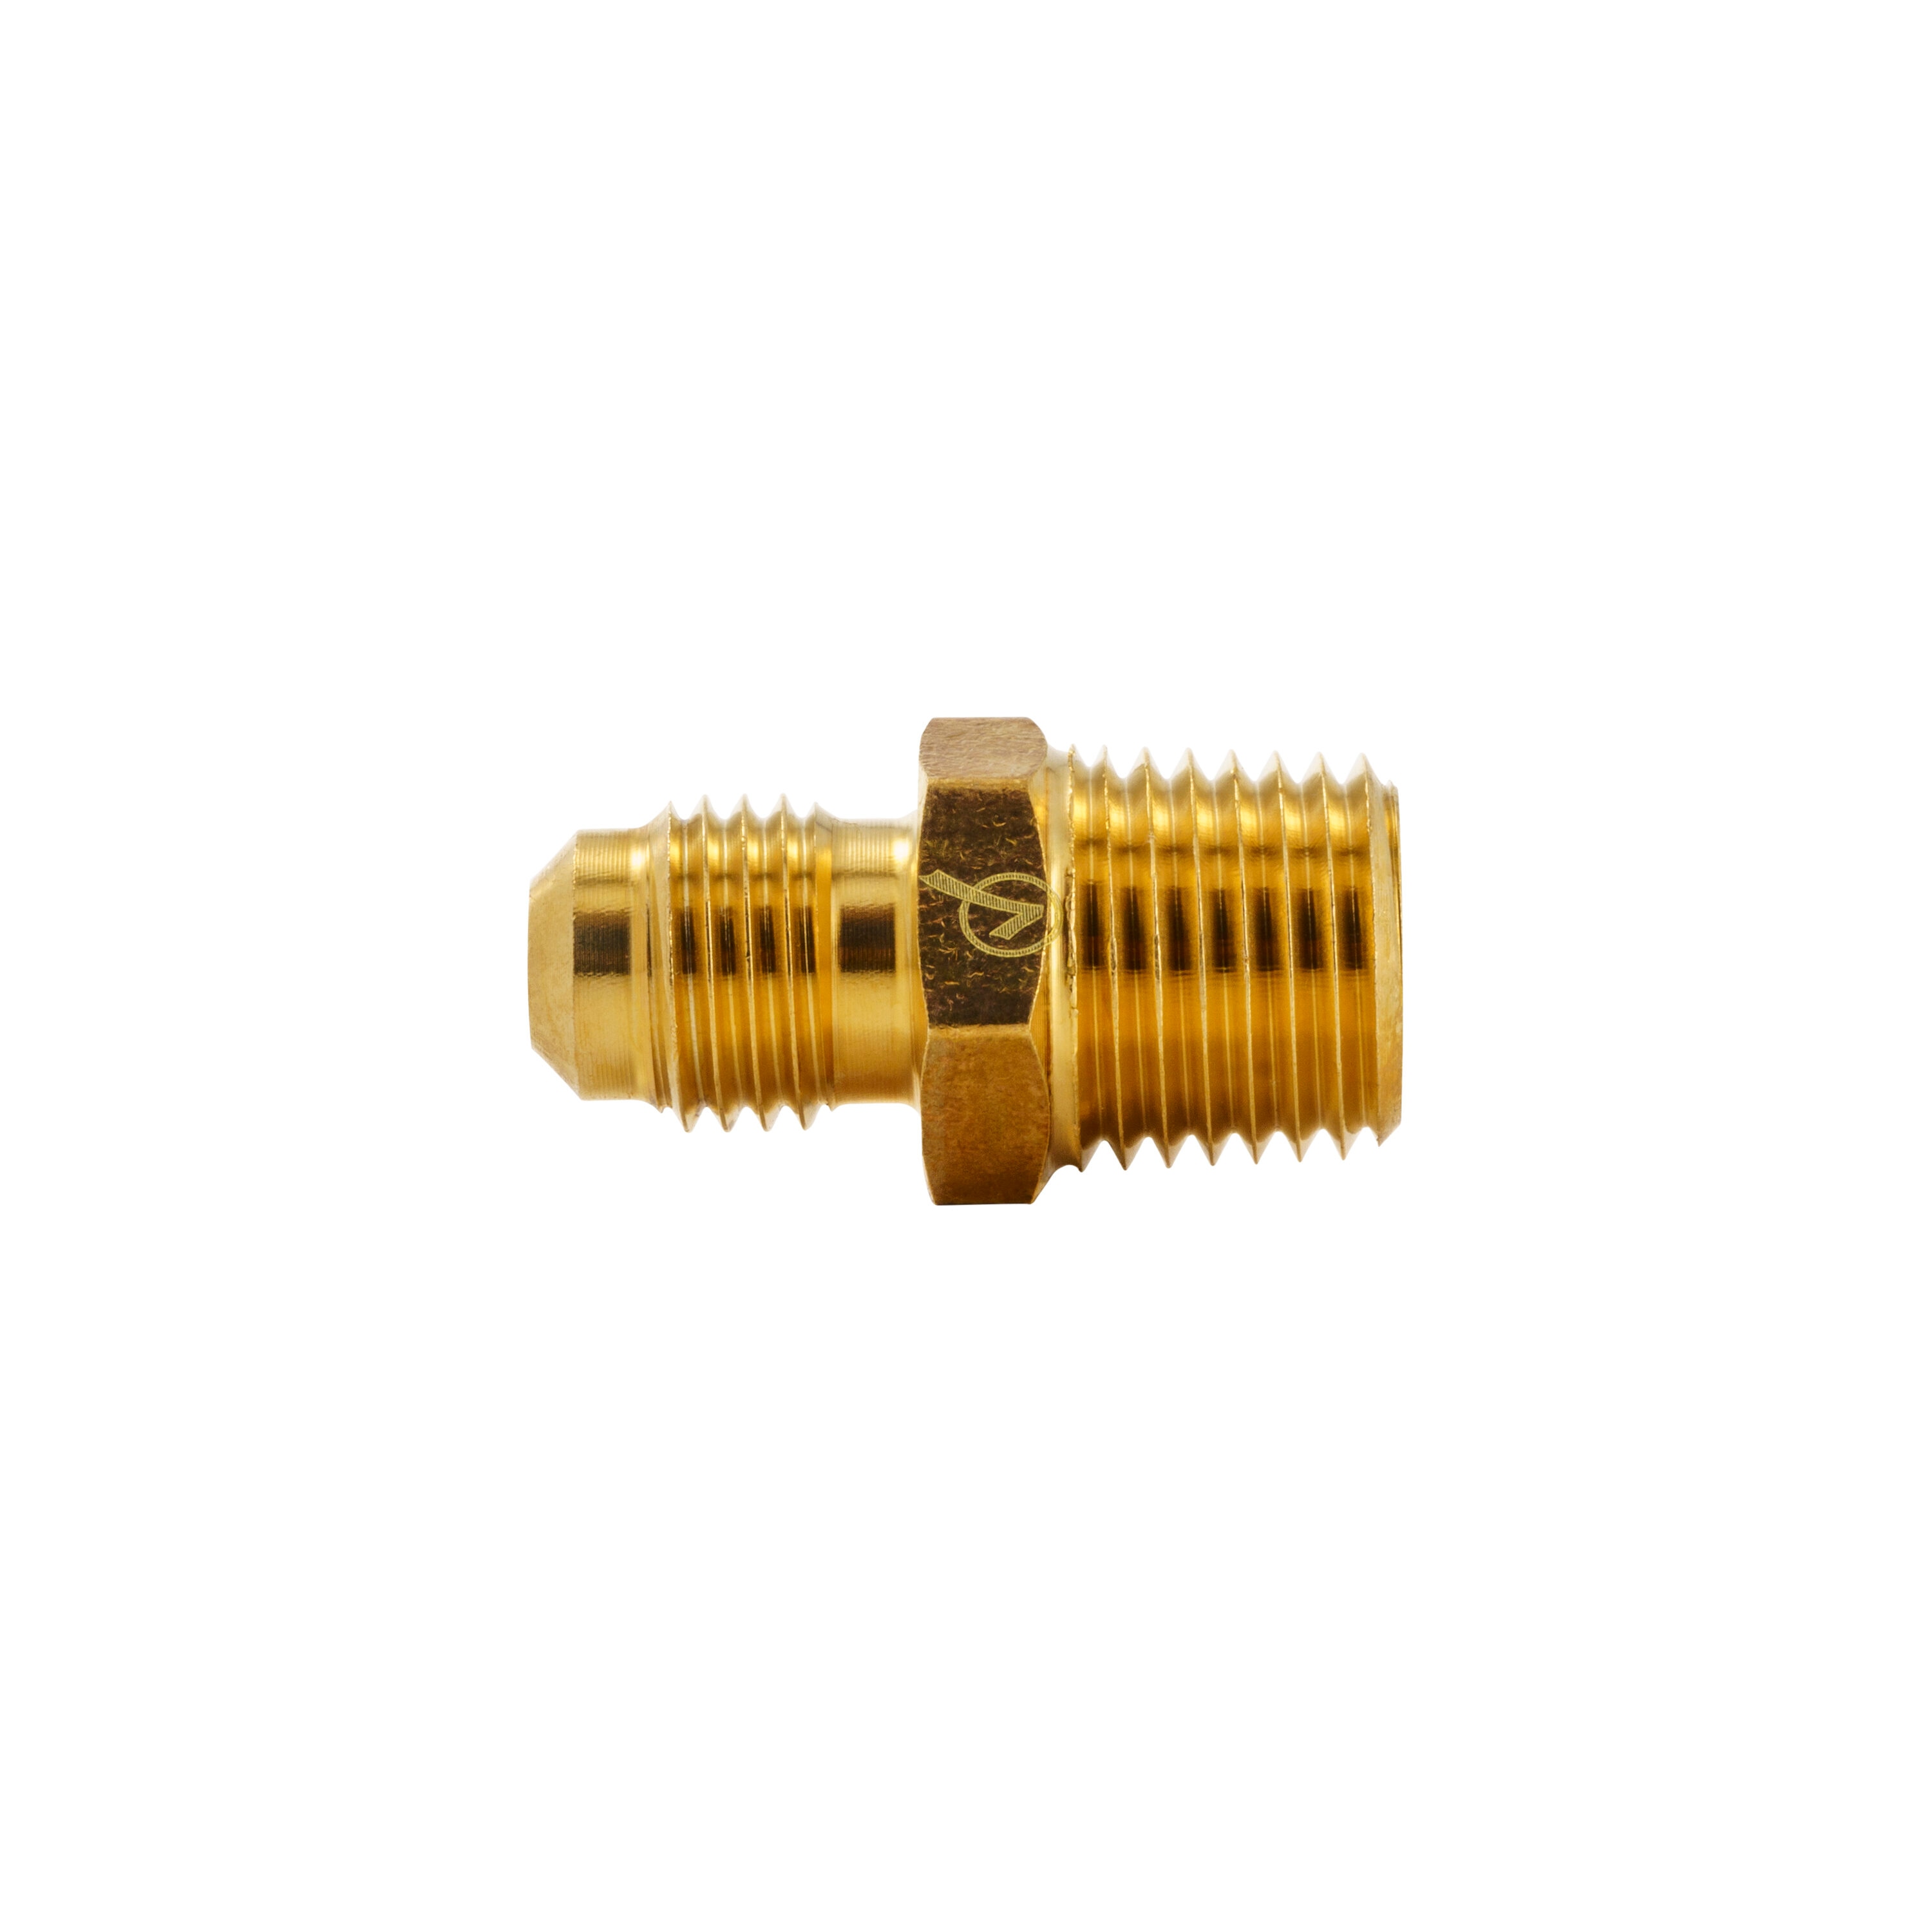 Proline Series 1/4-in x 1/4-in Threaded Union Fitting in the Brass Fittings  department at